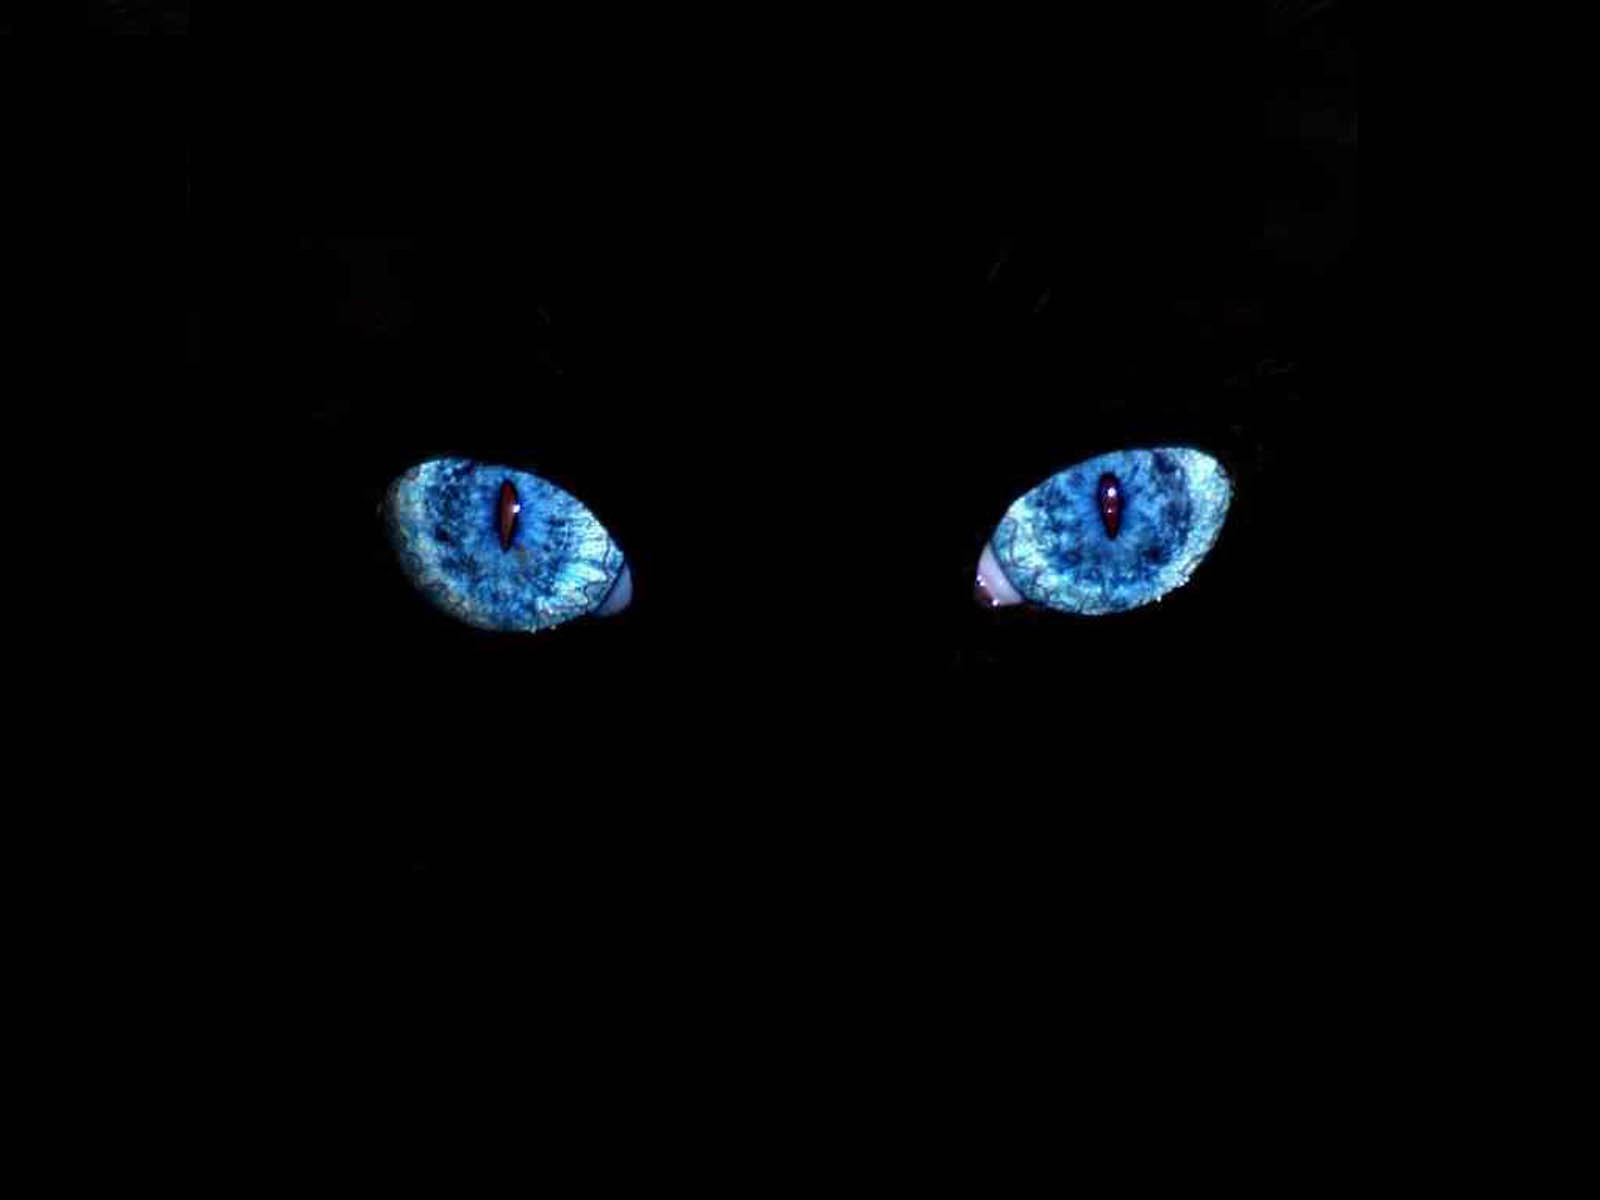 Tag Black Cat Blue Eyes Wallpaper Image Photos And Pictures For